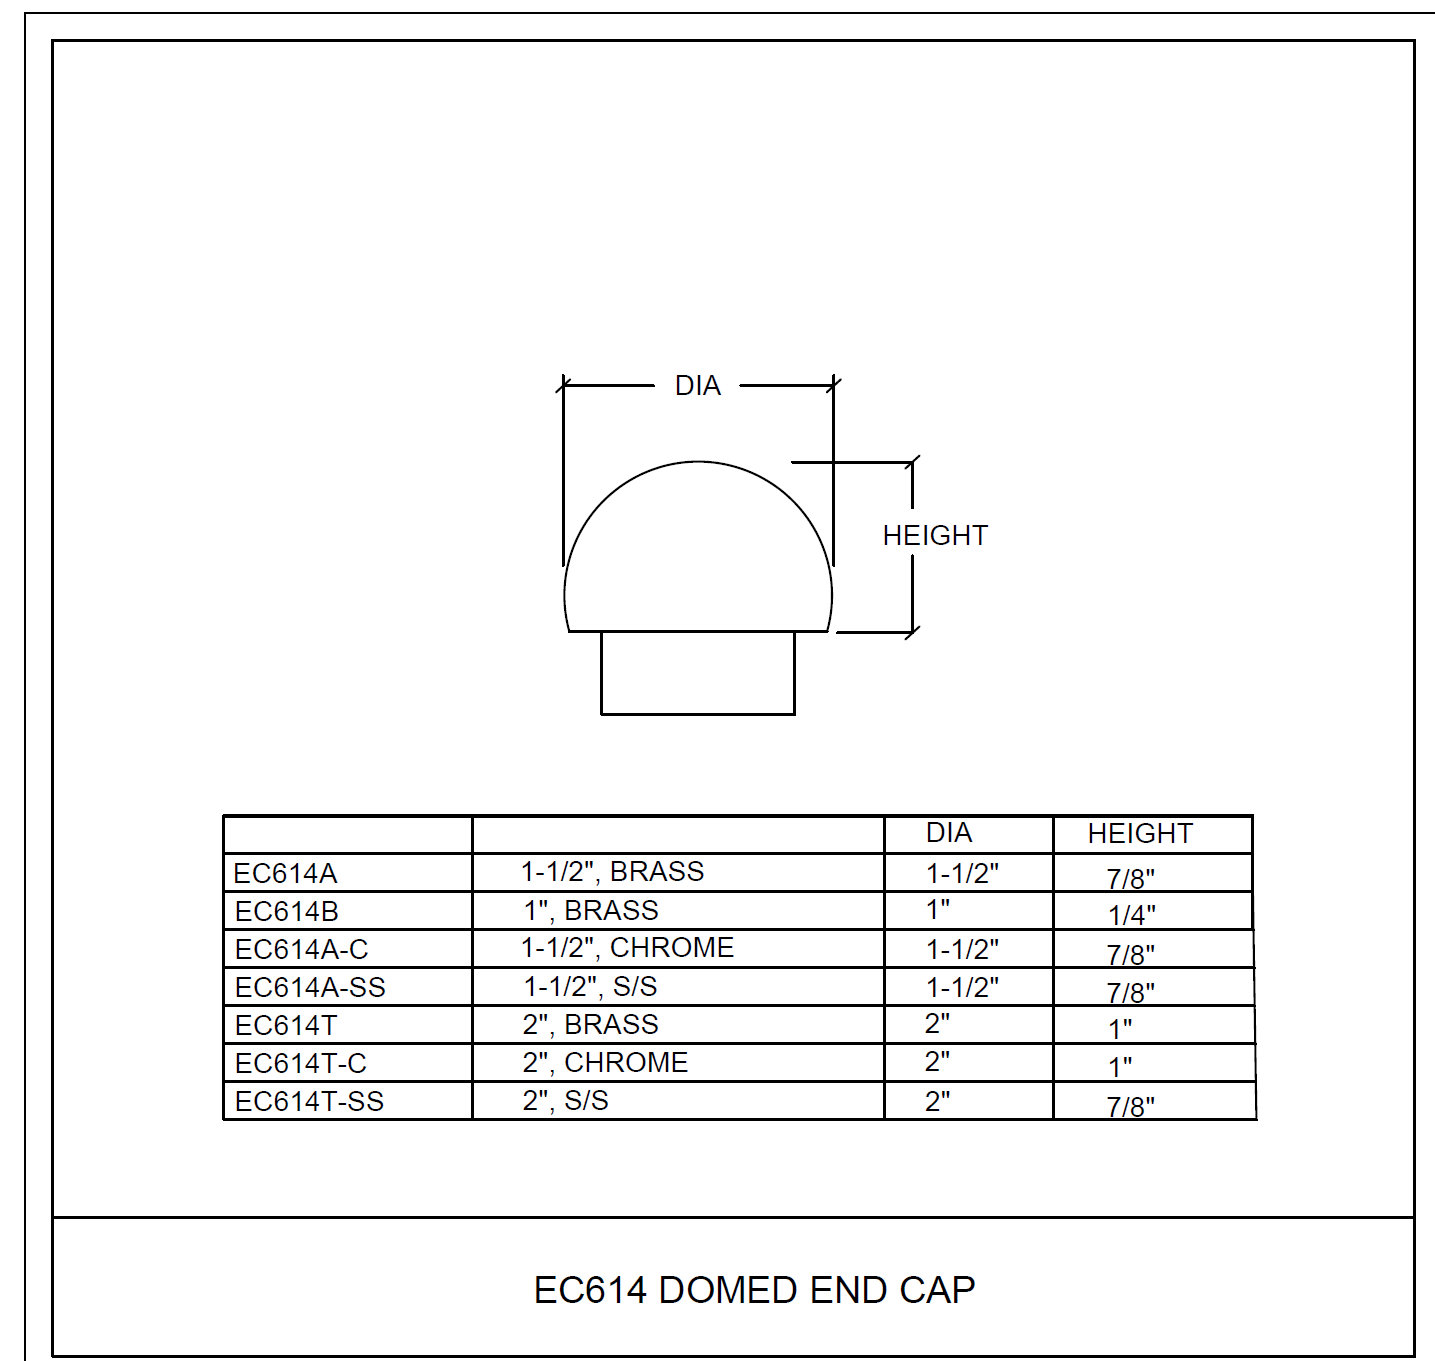 Domed End Cap 2.0" in Oil-Rubbed Bronze finish